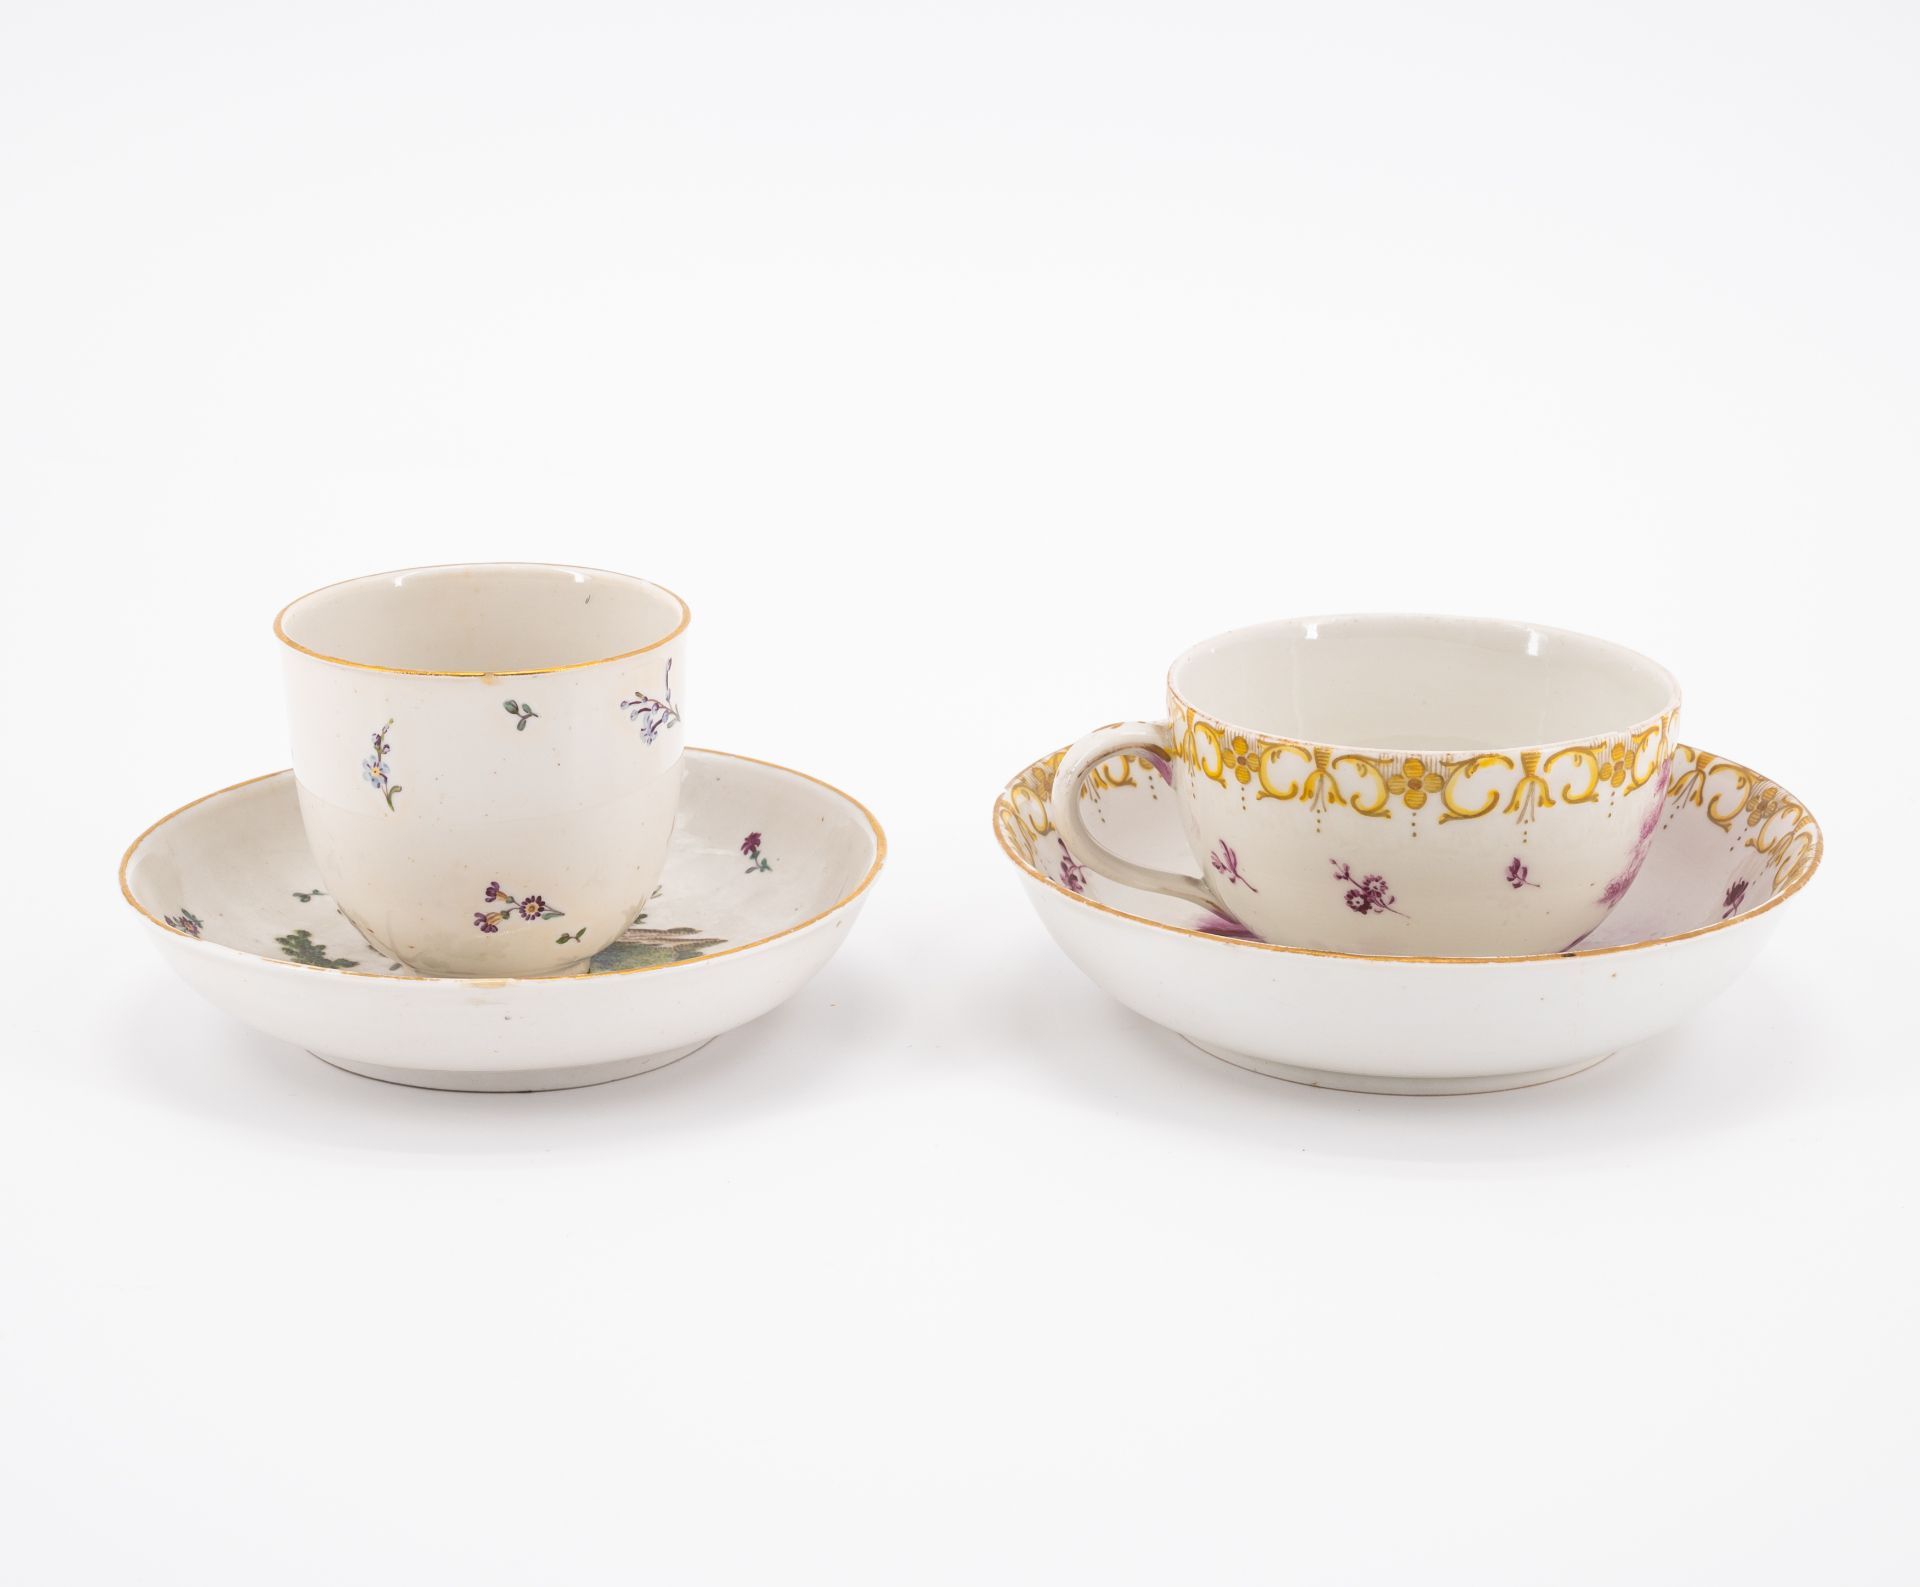 PORCELAIN SLOP BOWL, THREE CUPS AND SAUCERS WITH FIGURATIVE AND FLORAL DECOR - Image 14 of 22